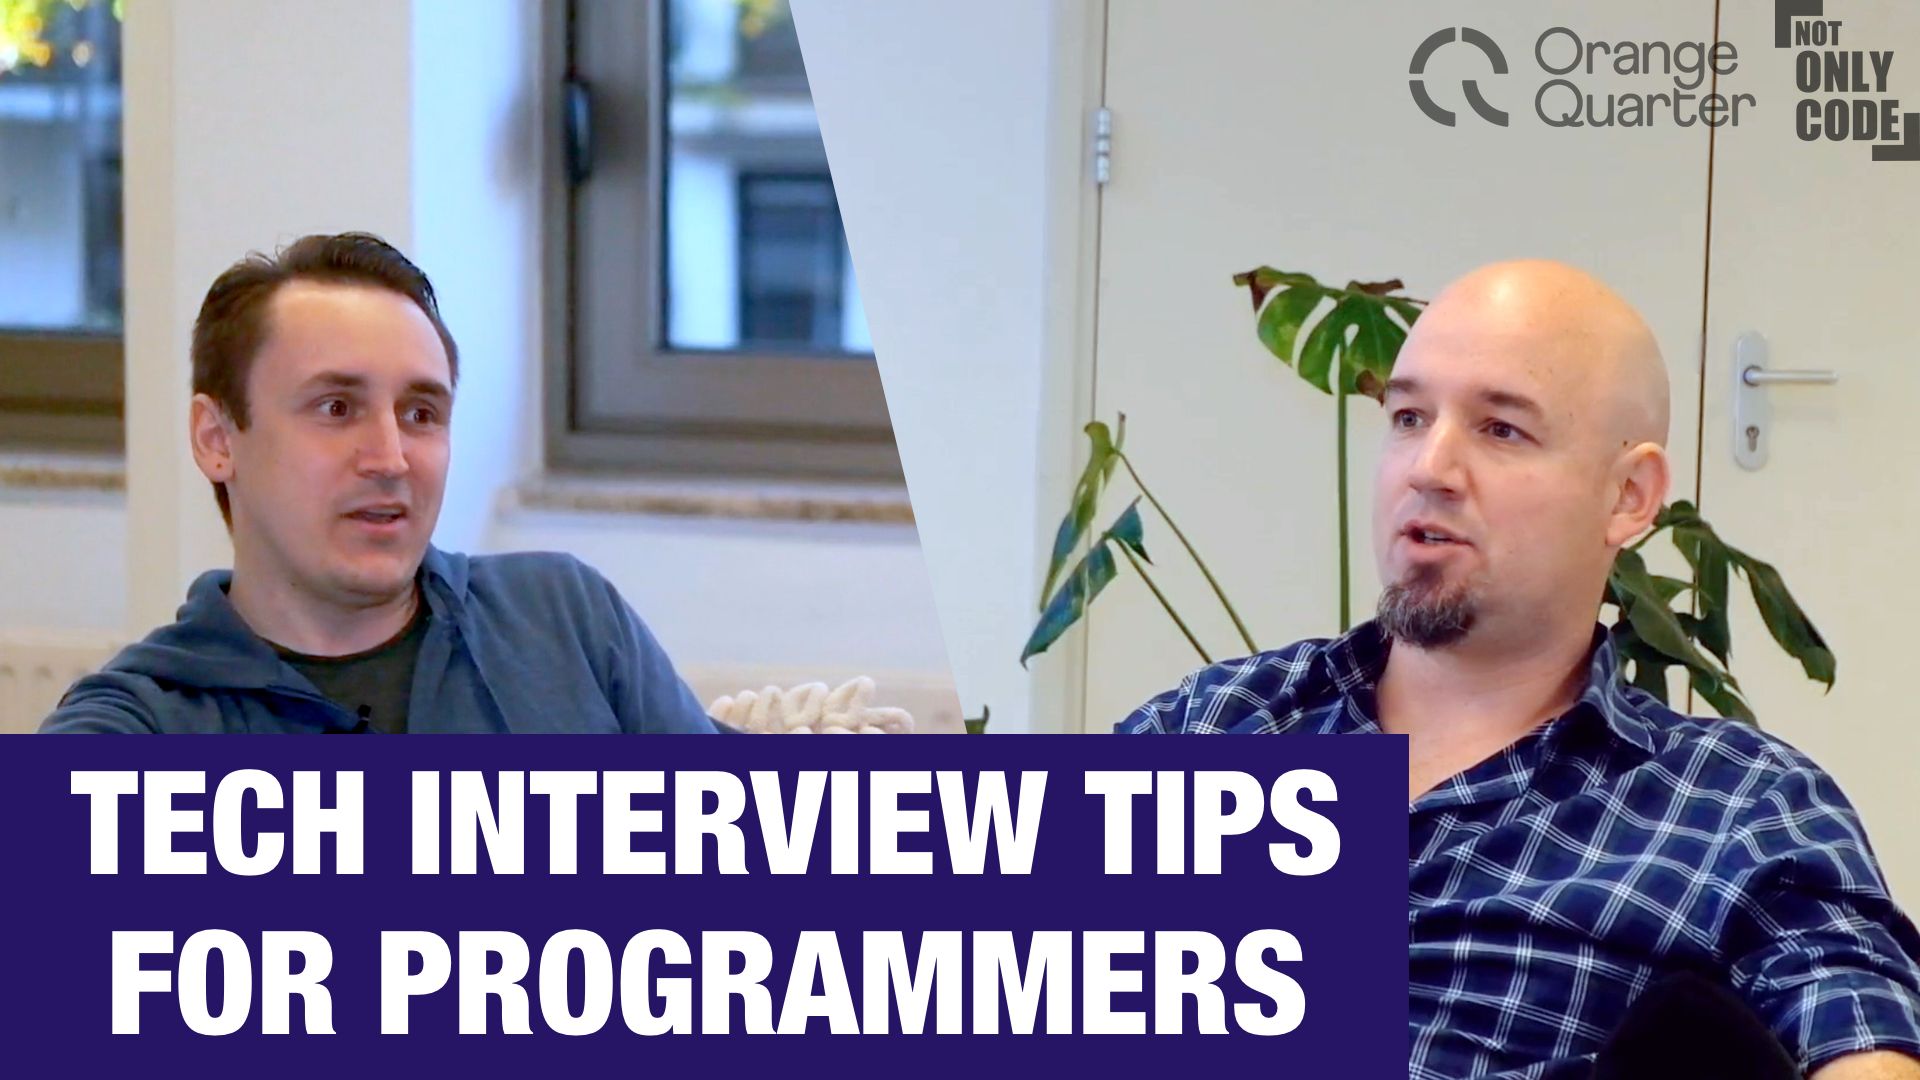 Tech interview tips for developers